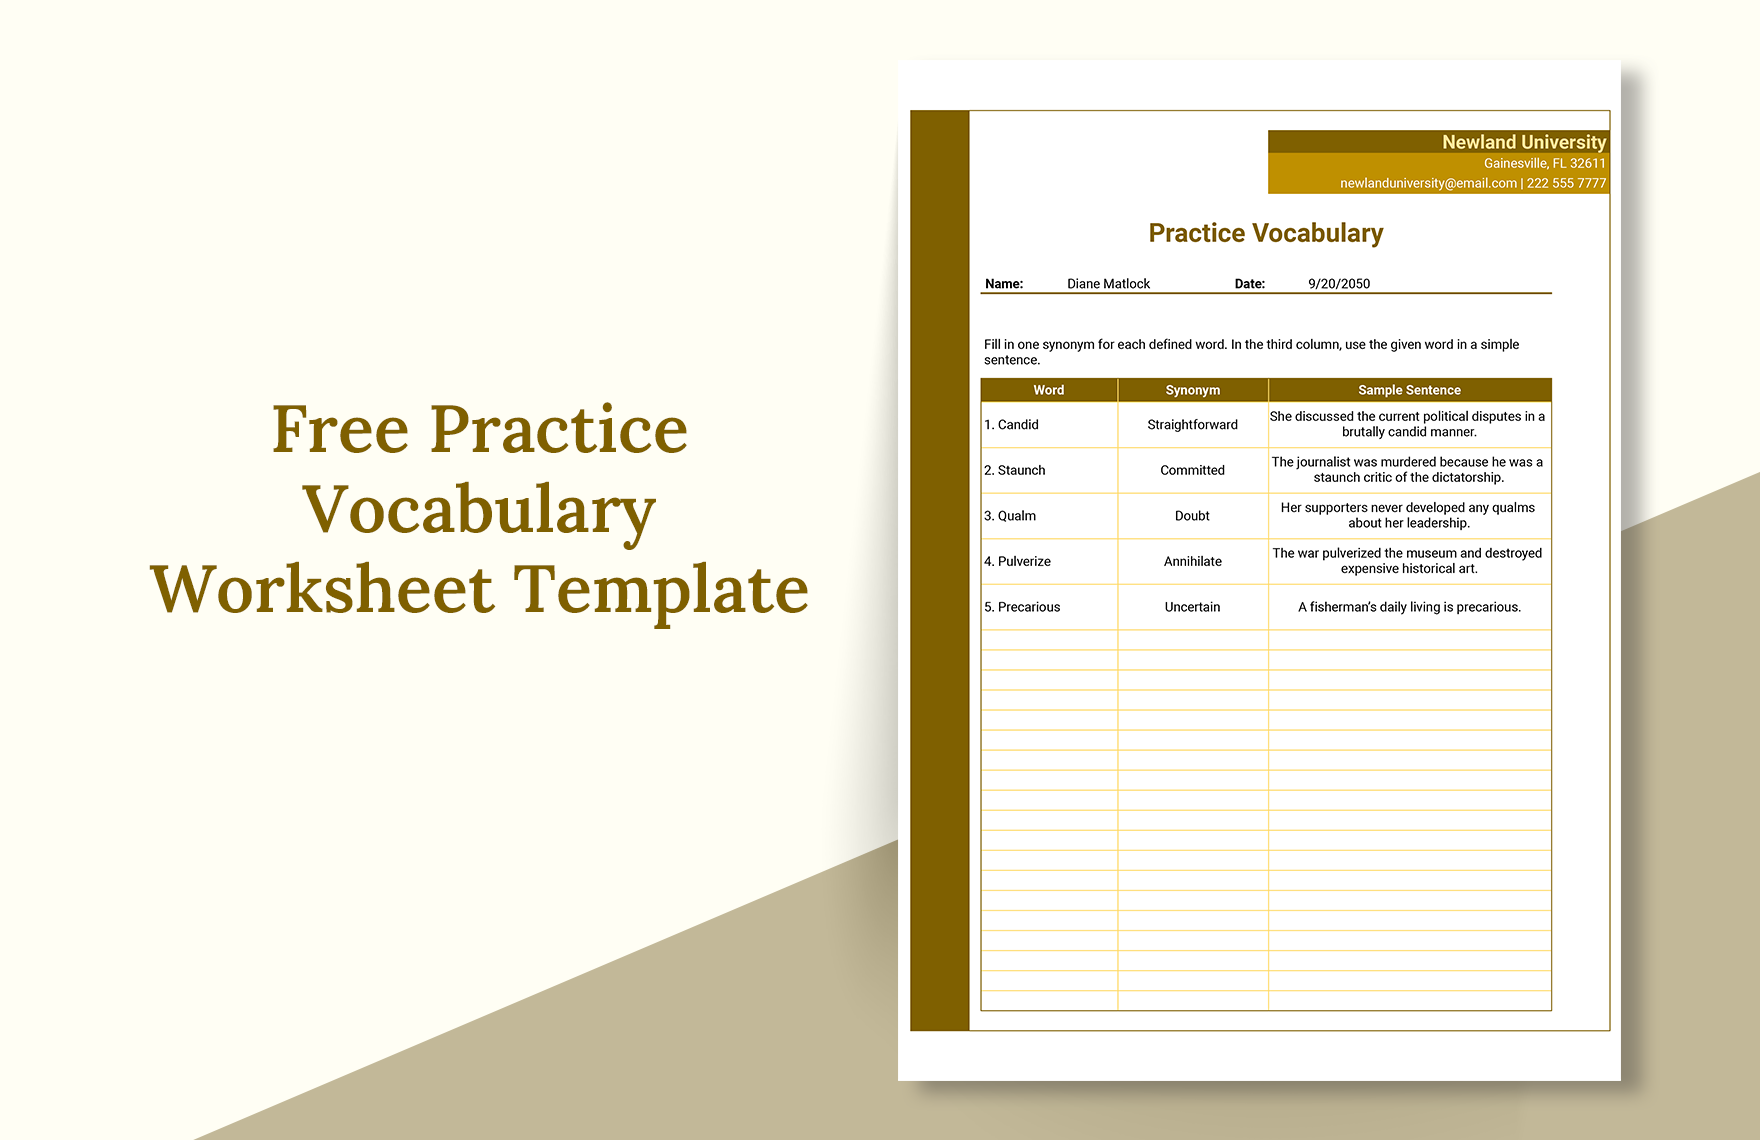 Practice Vocabulary Worksheet Template in Excel, Google Sheets